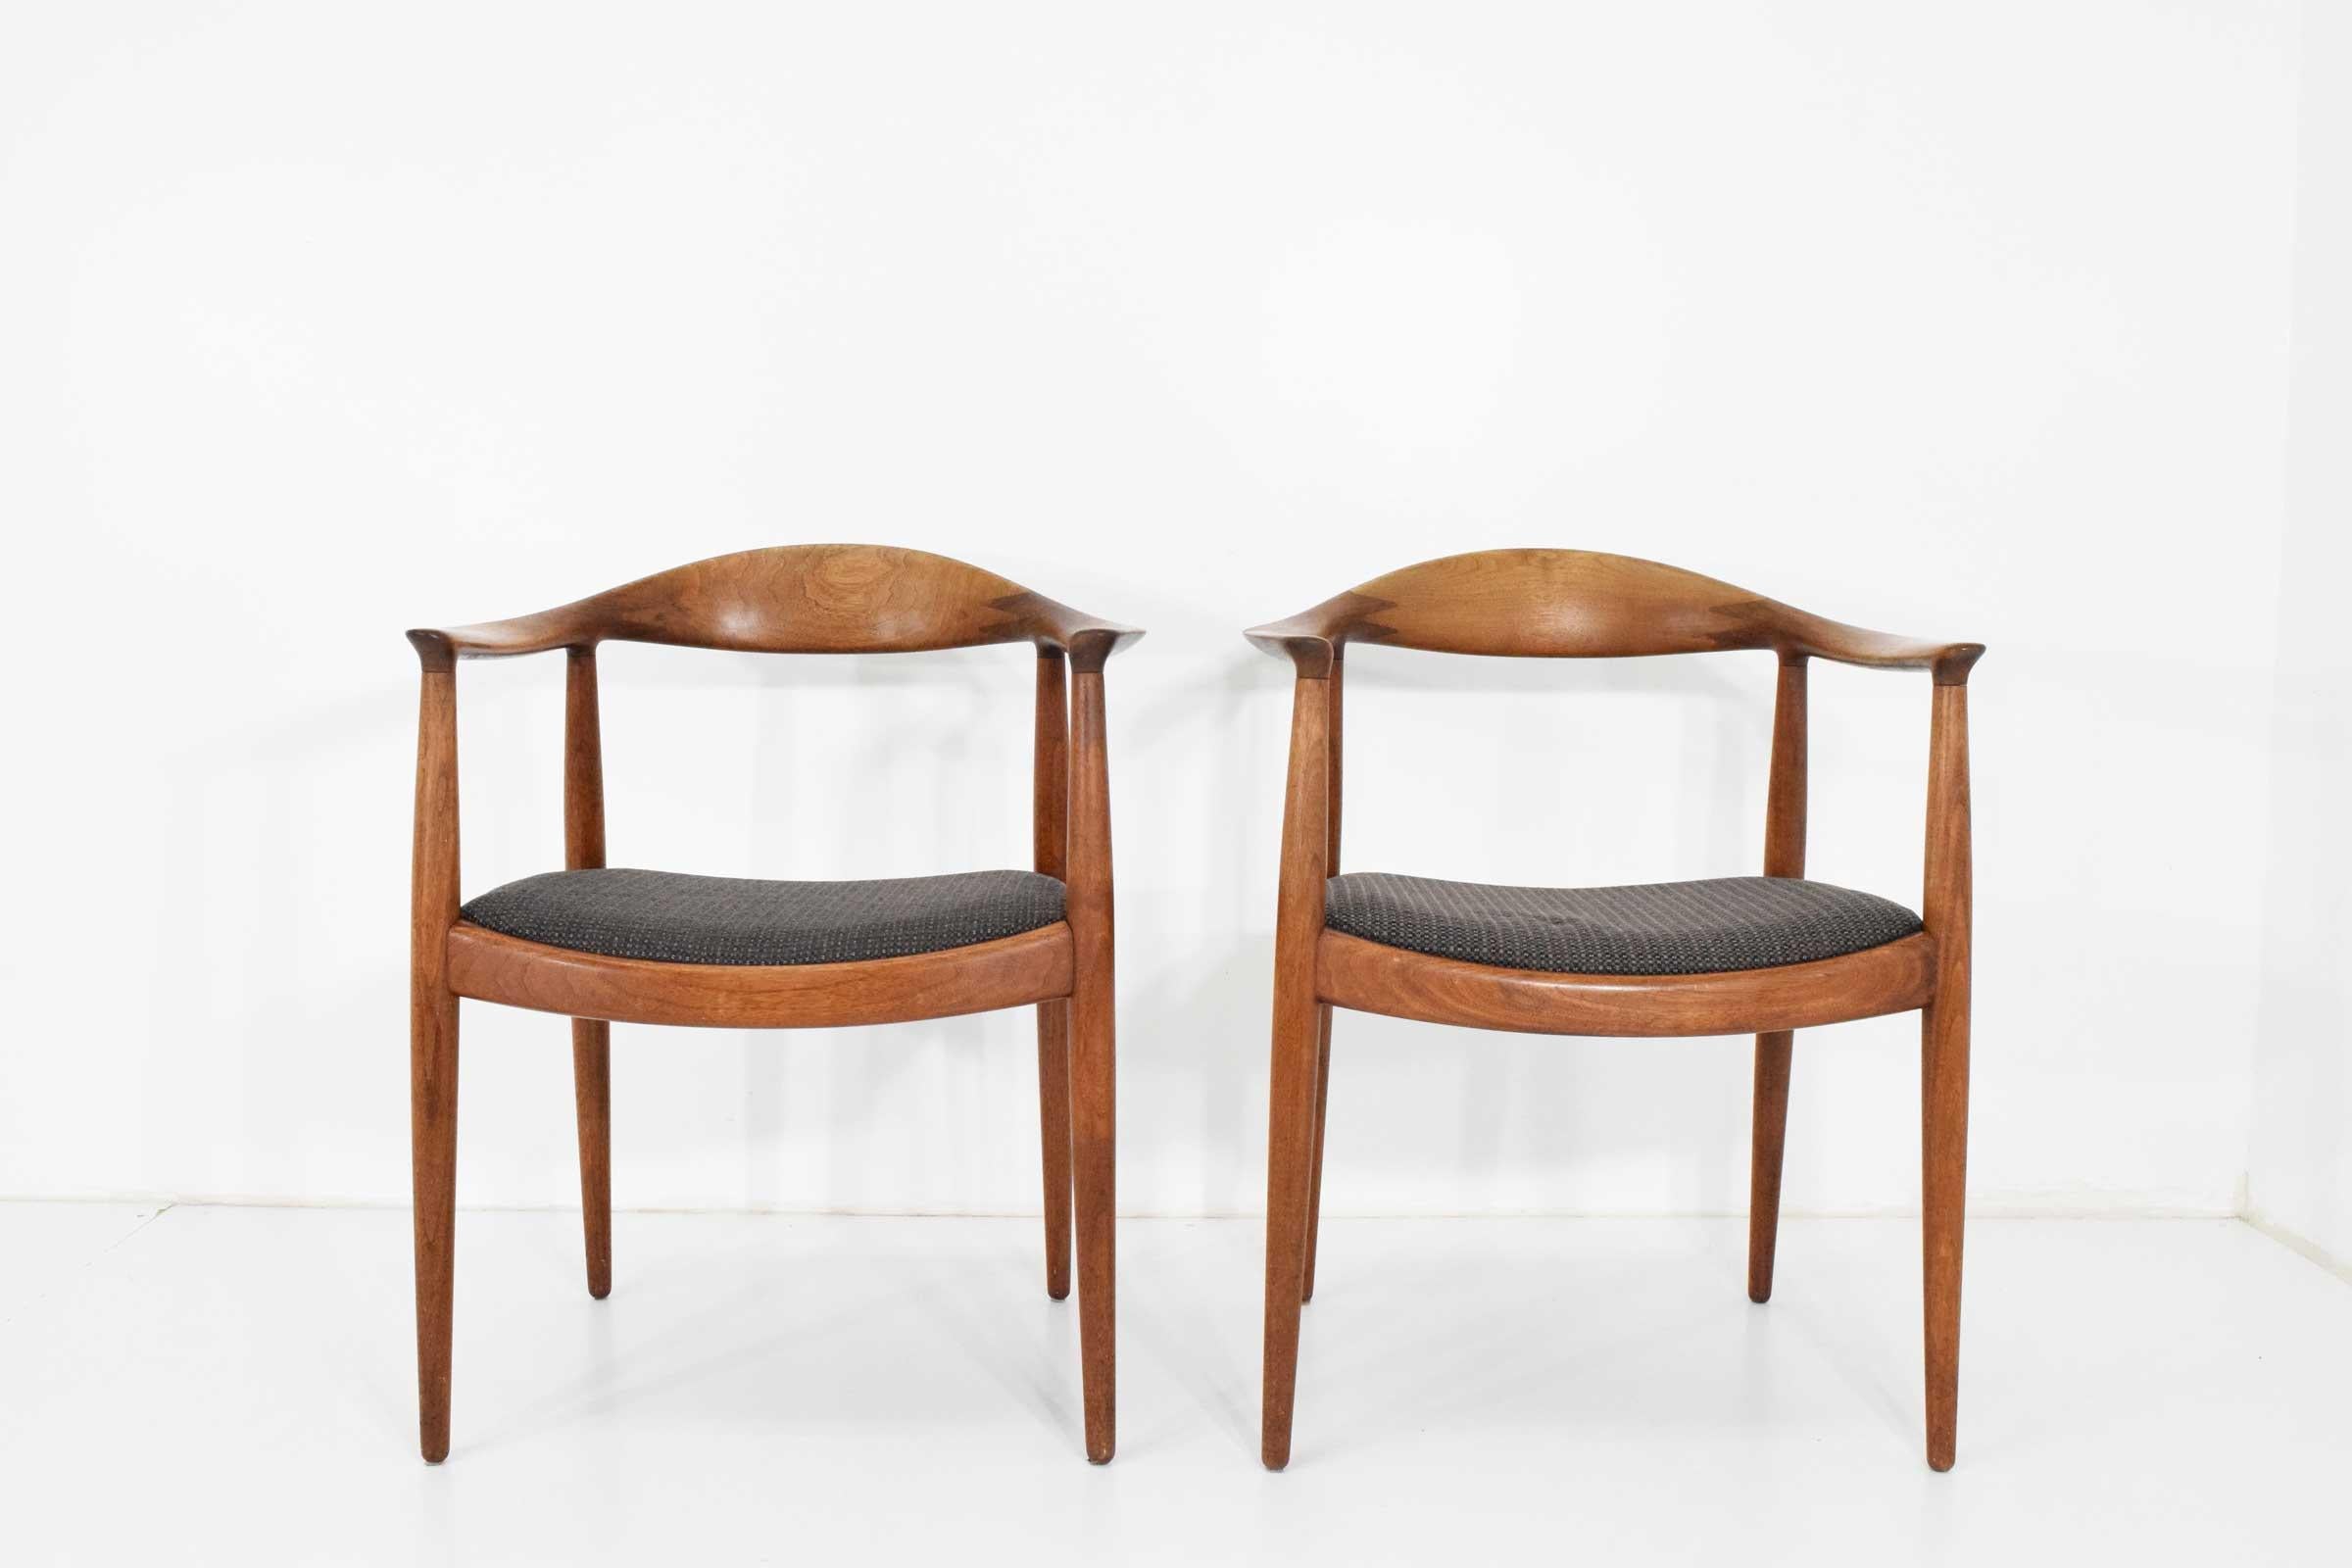 Hans Wegner Round Chairs 8 Available 3